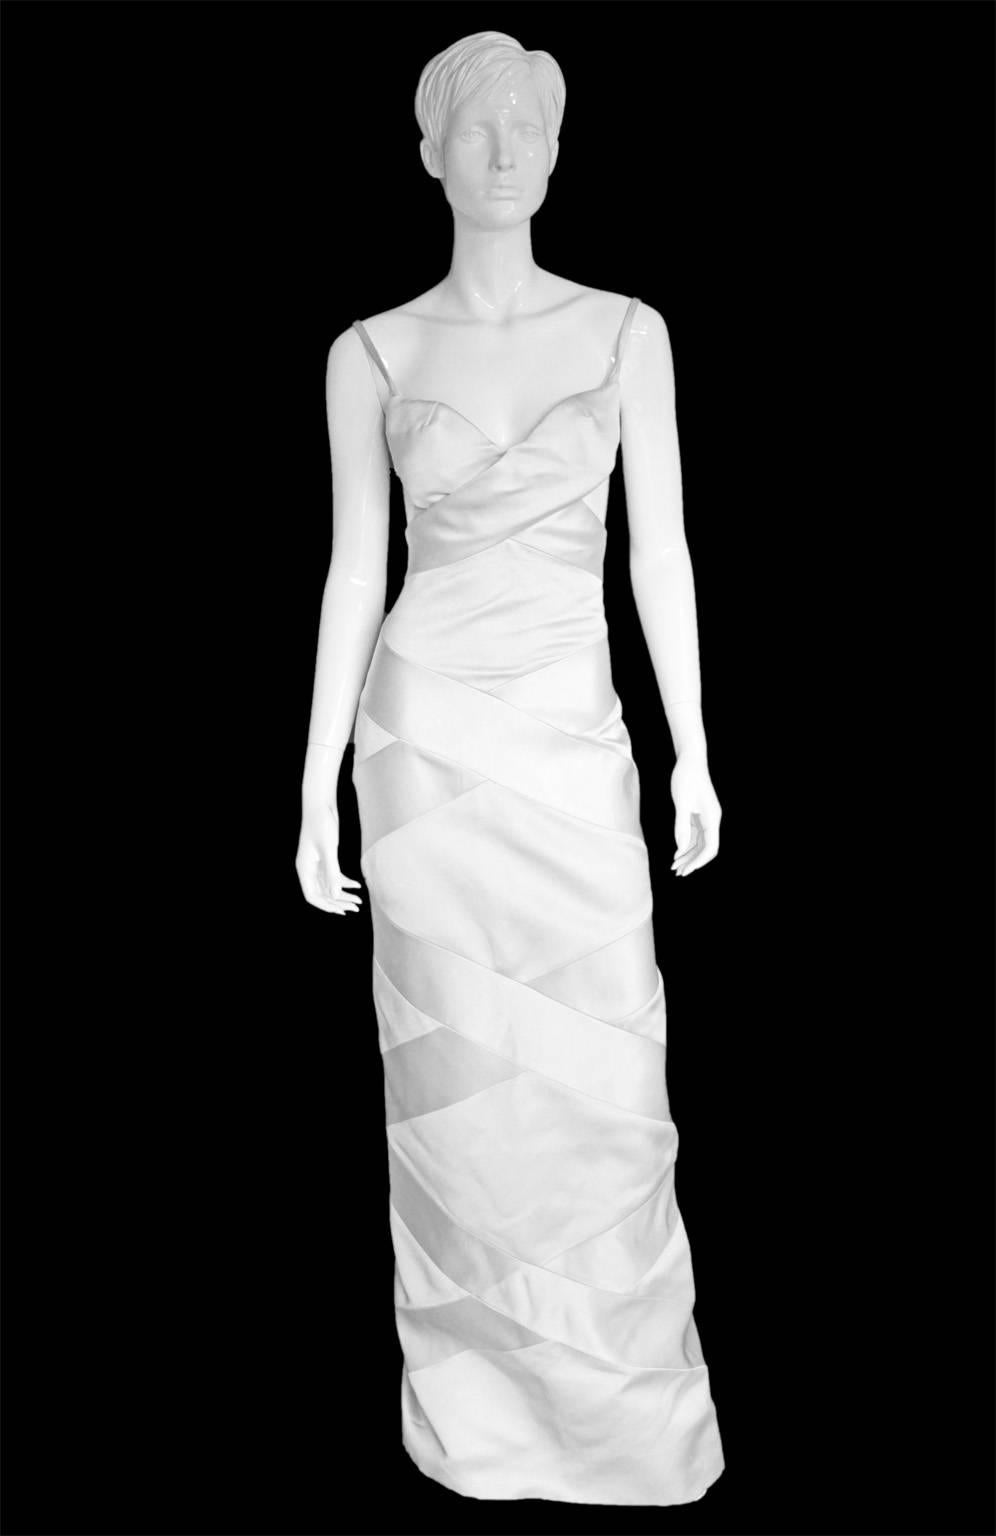 MOVING OS SO ALL CURRENT STOCK MUST GO!!!

Incredibly Rare Tom Ford For Gucci SS 2001 Collection White Bandage Gown!

Who could ever forget that incredible silk cross-over bra top from Tom Ford's amazing Spring/Summer 2001 collection for Gucci?